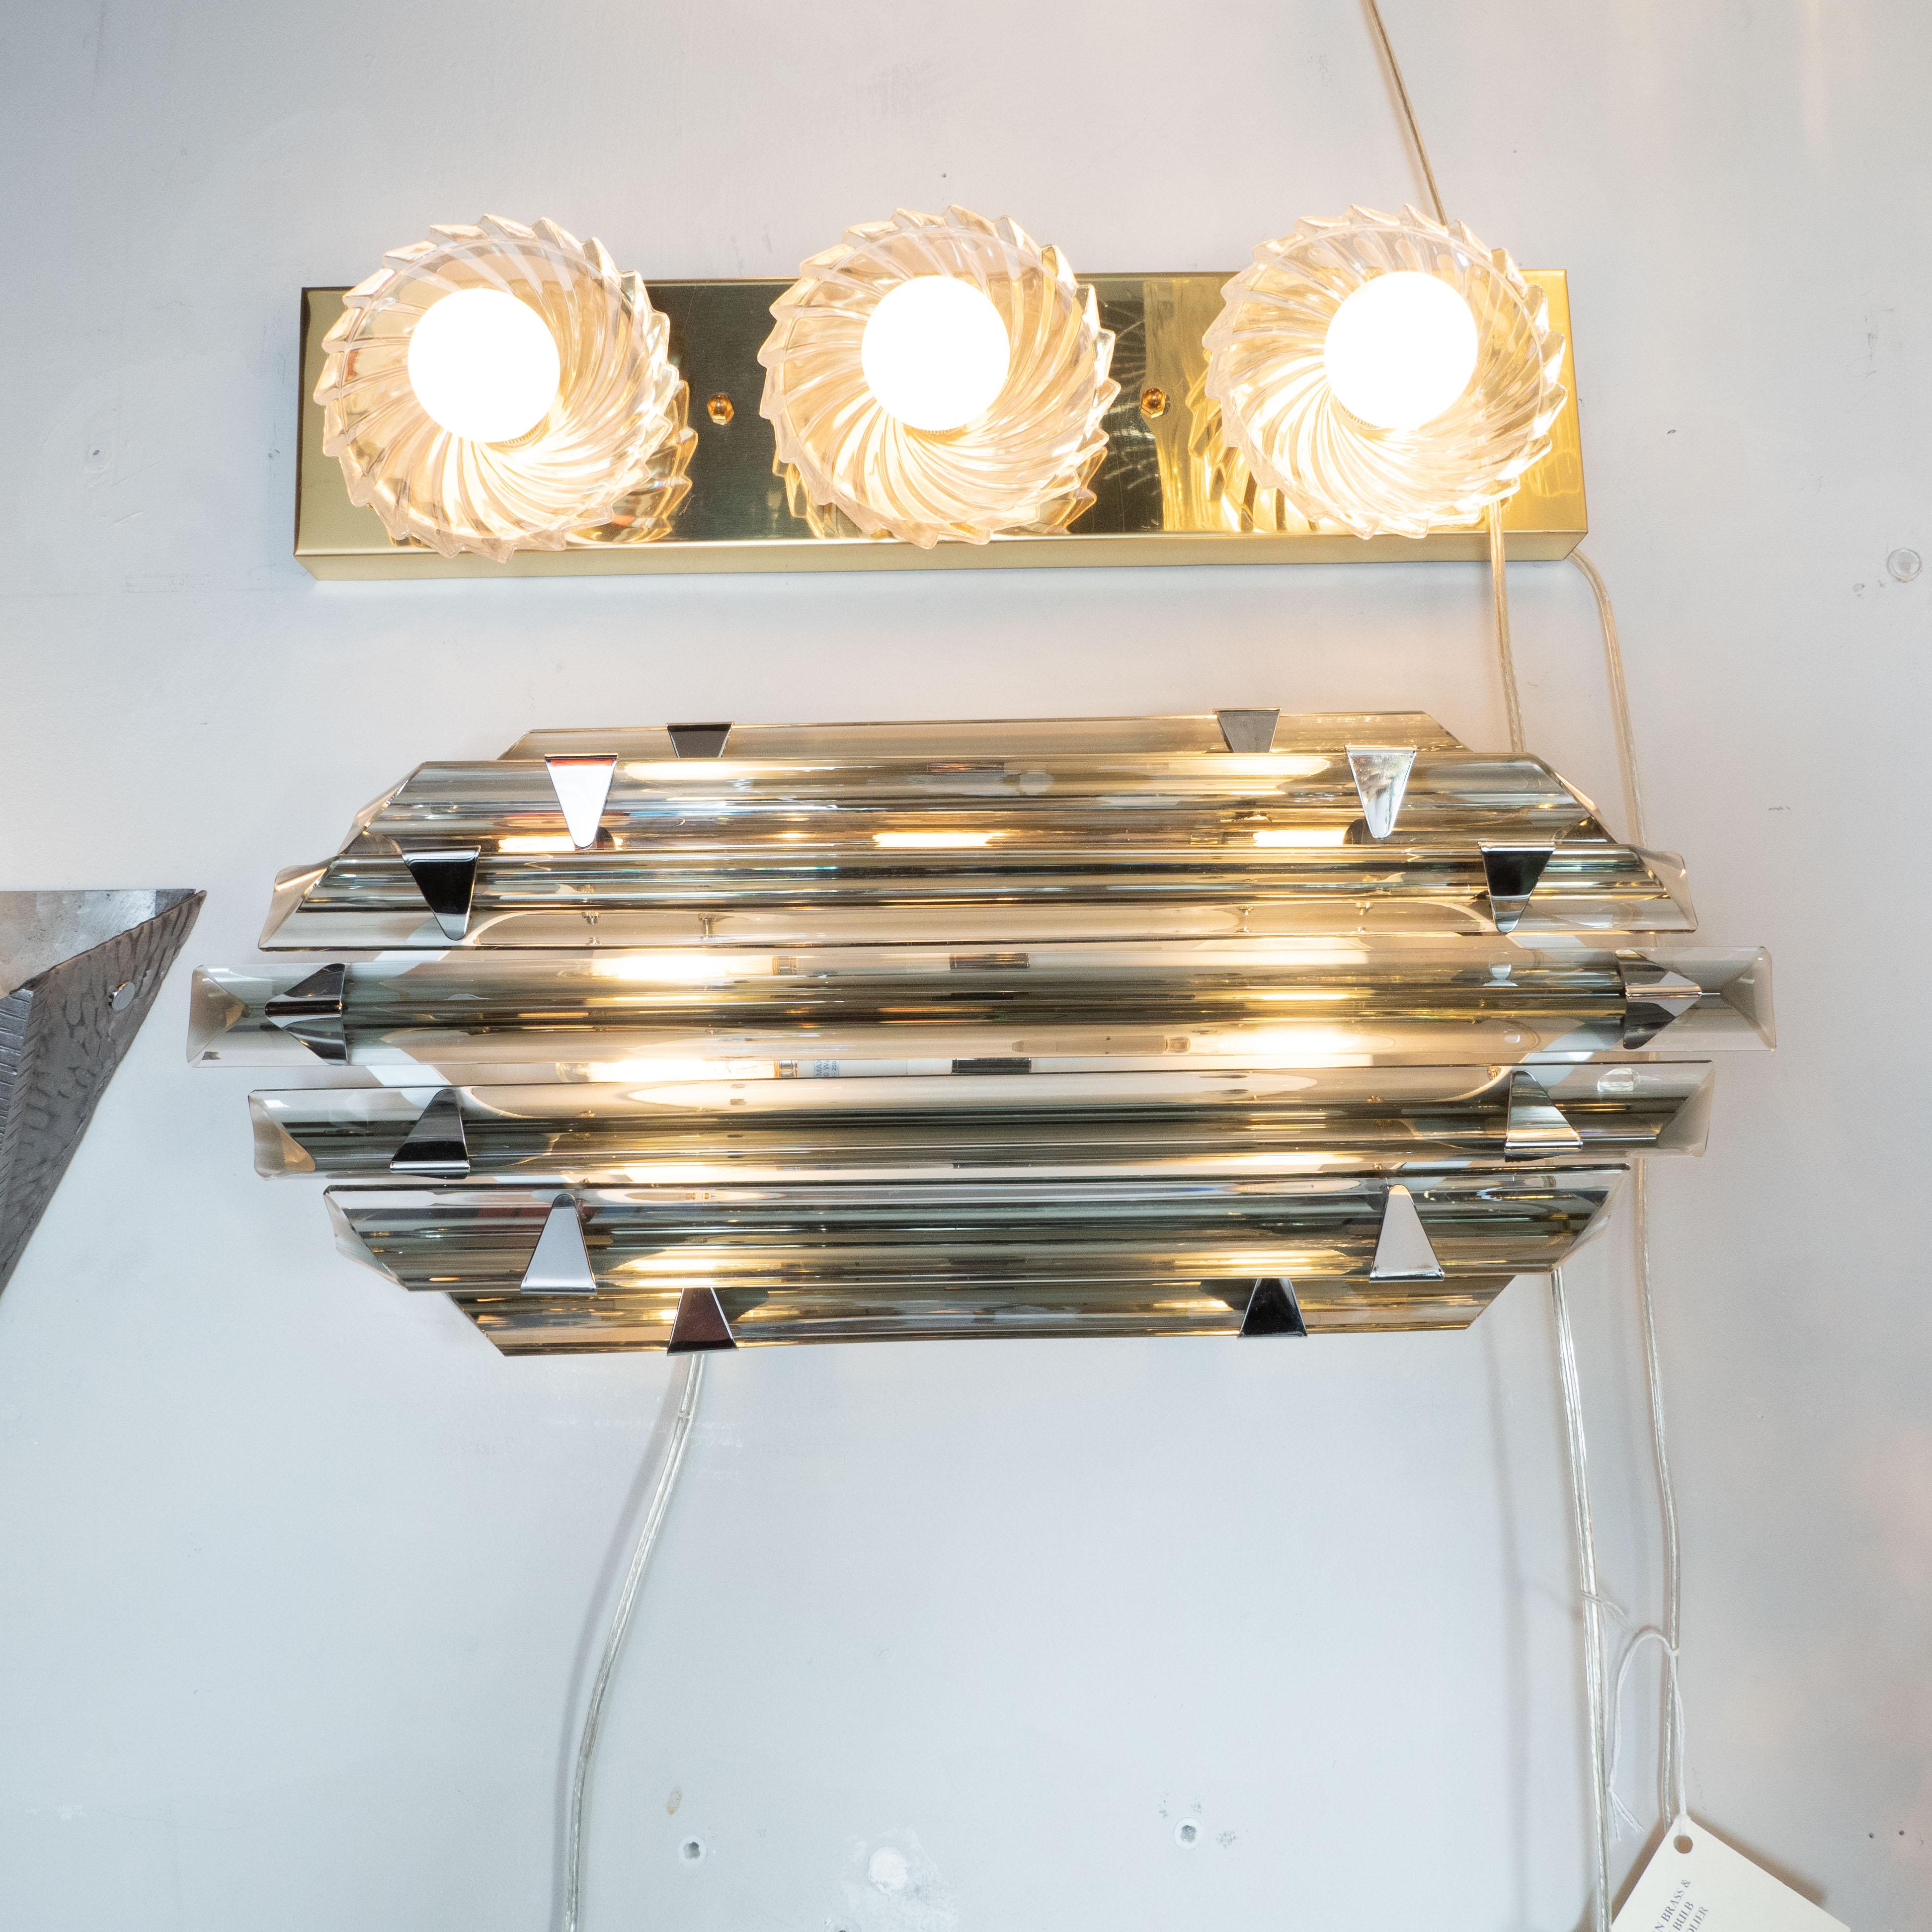 This stunning modernist vanity light/ sconce was realized in Murano, Italy- the island off the coast of Venice renowned for centuries for its superlative glass production. It features hand blown smoked Murano subtly convex glass rods of staggered